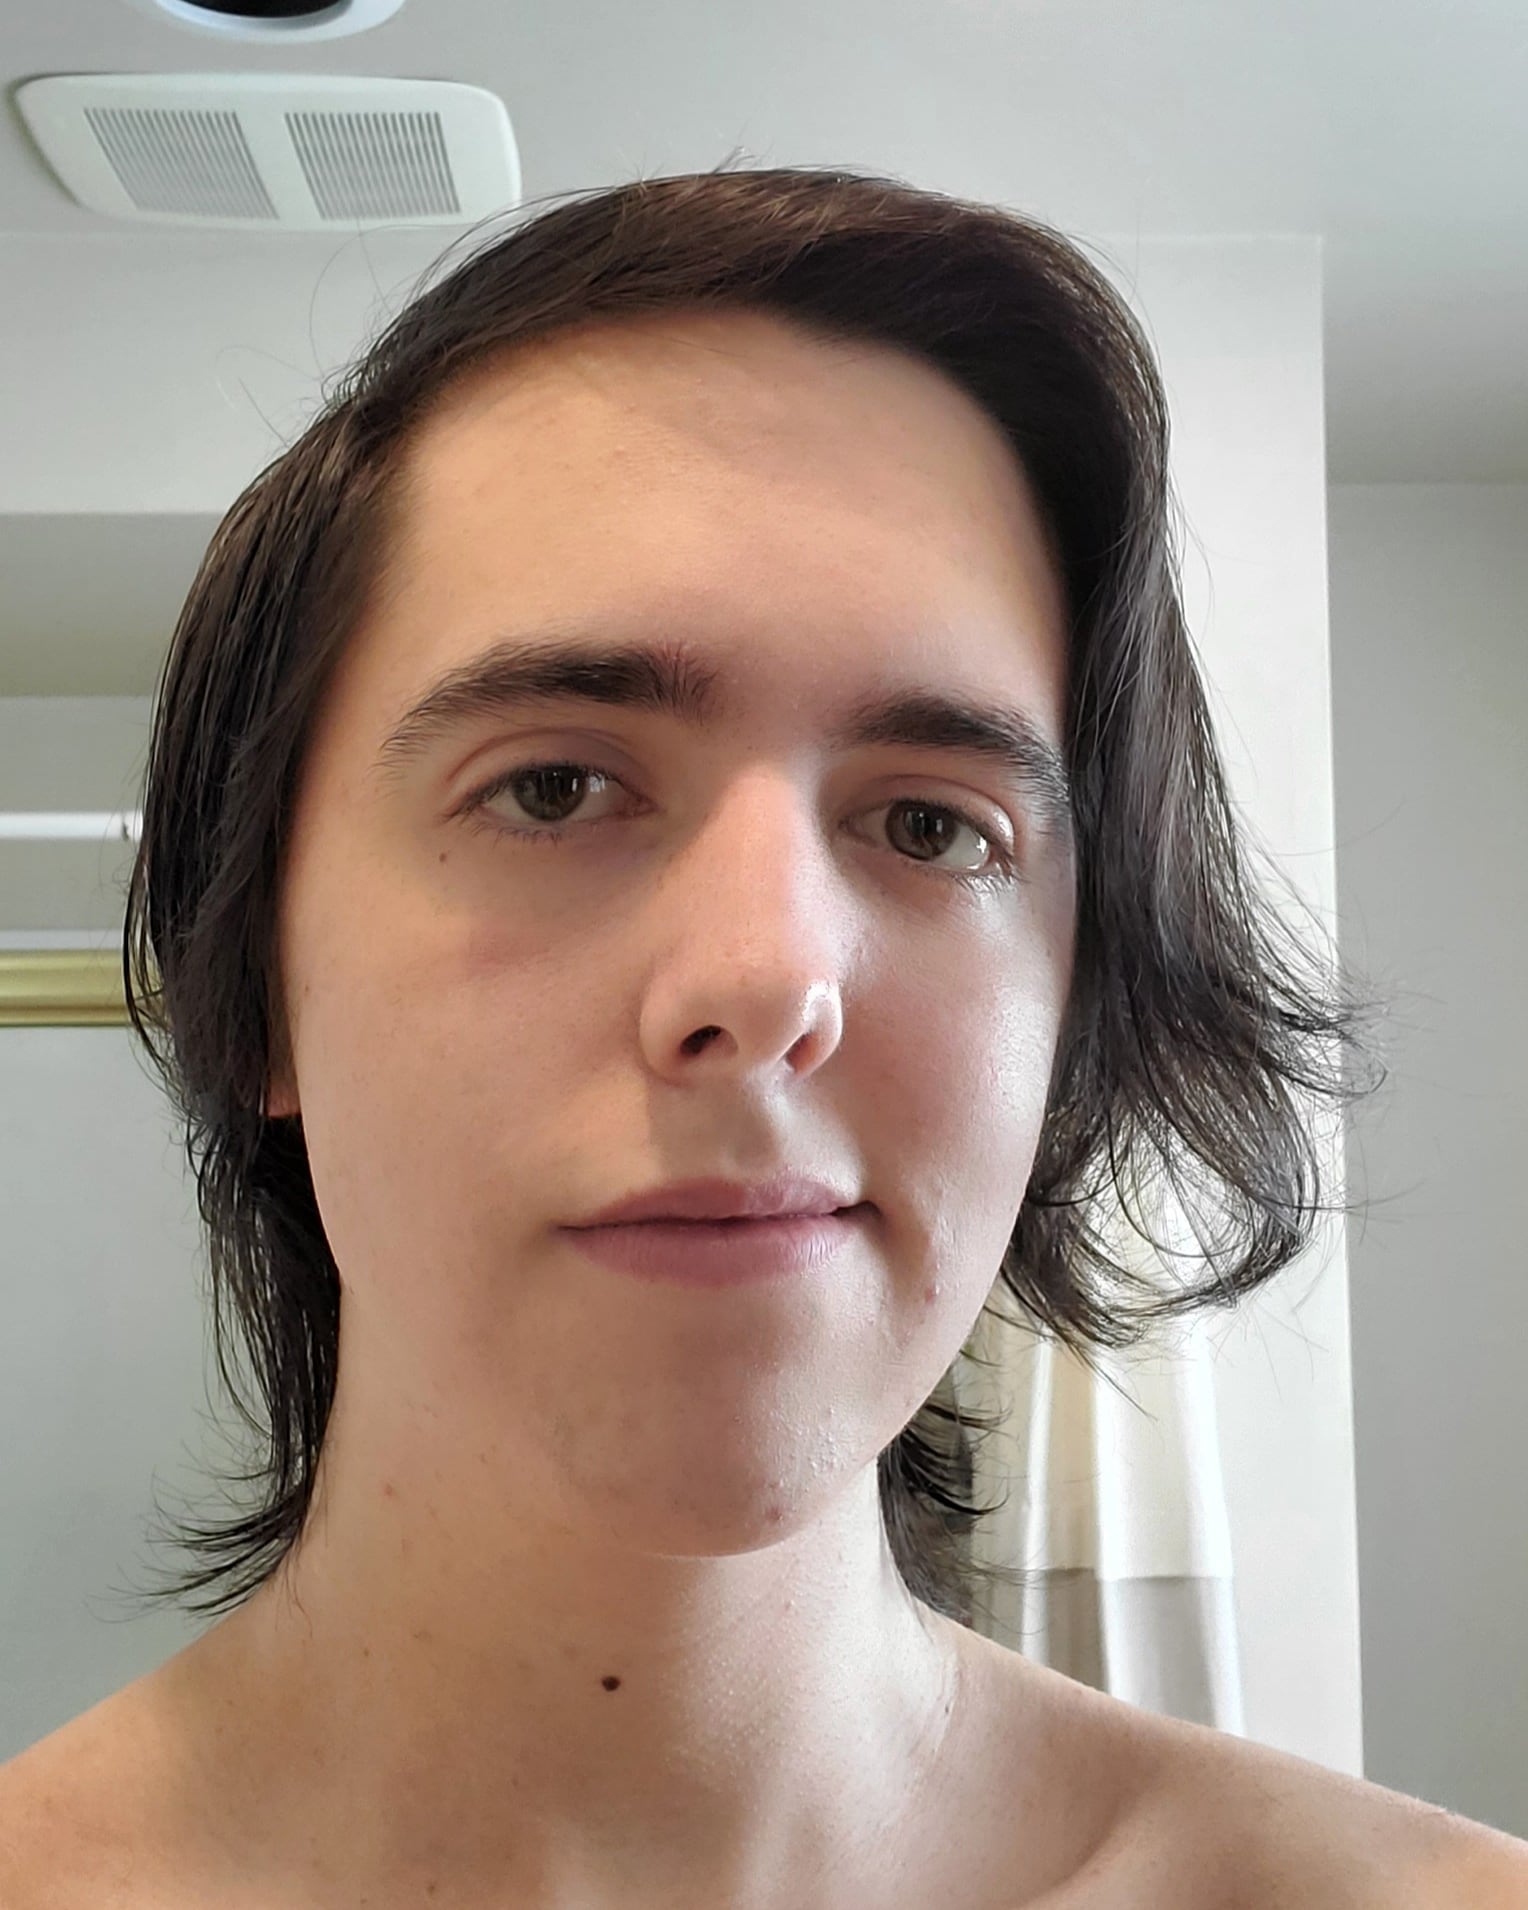 Dum Puppy Girl - SFW on X: "FACE REVEAL! Do I look submissive and  breedable? #femboy #femboylewd #feminineboy #nonbinary #bisexual  #facereveal #submissiveandbreedable https://t.co/iBj3SmvIiX" / X